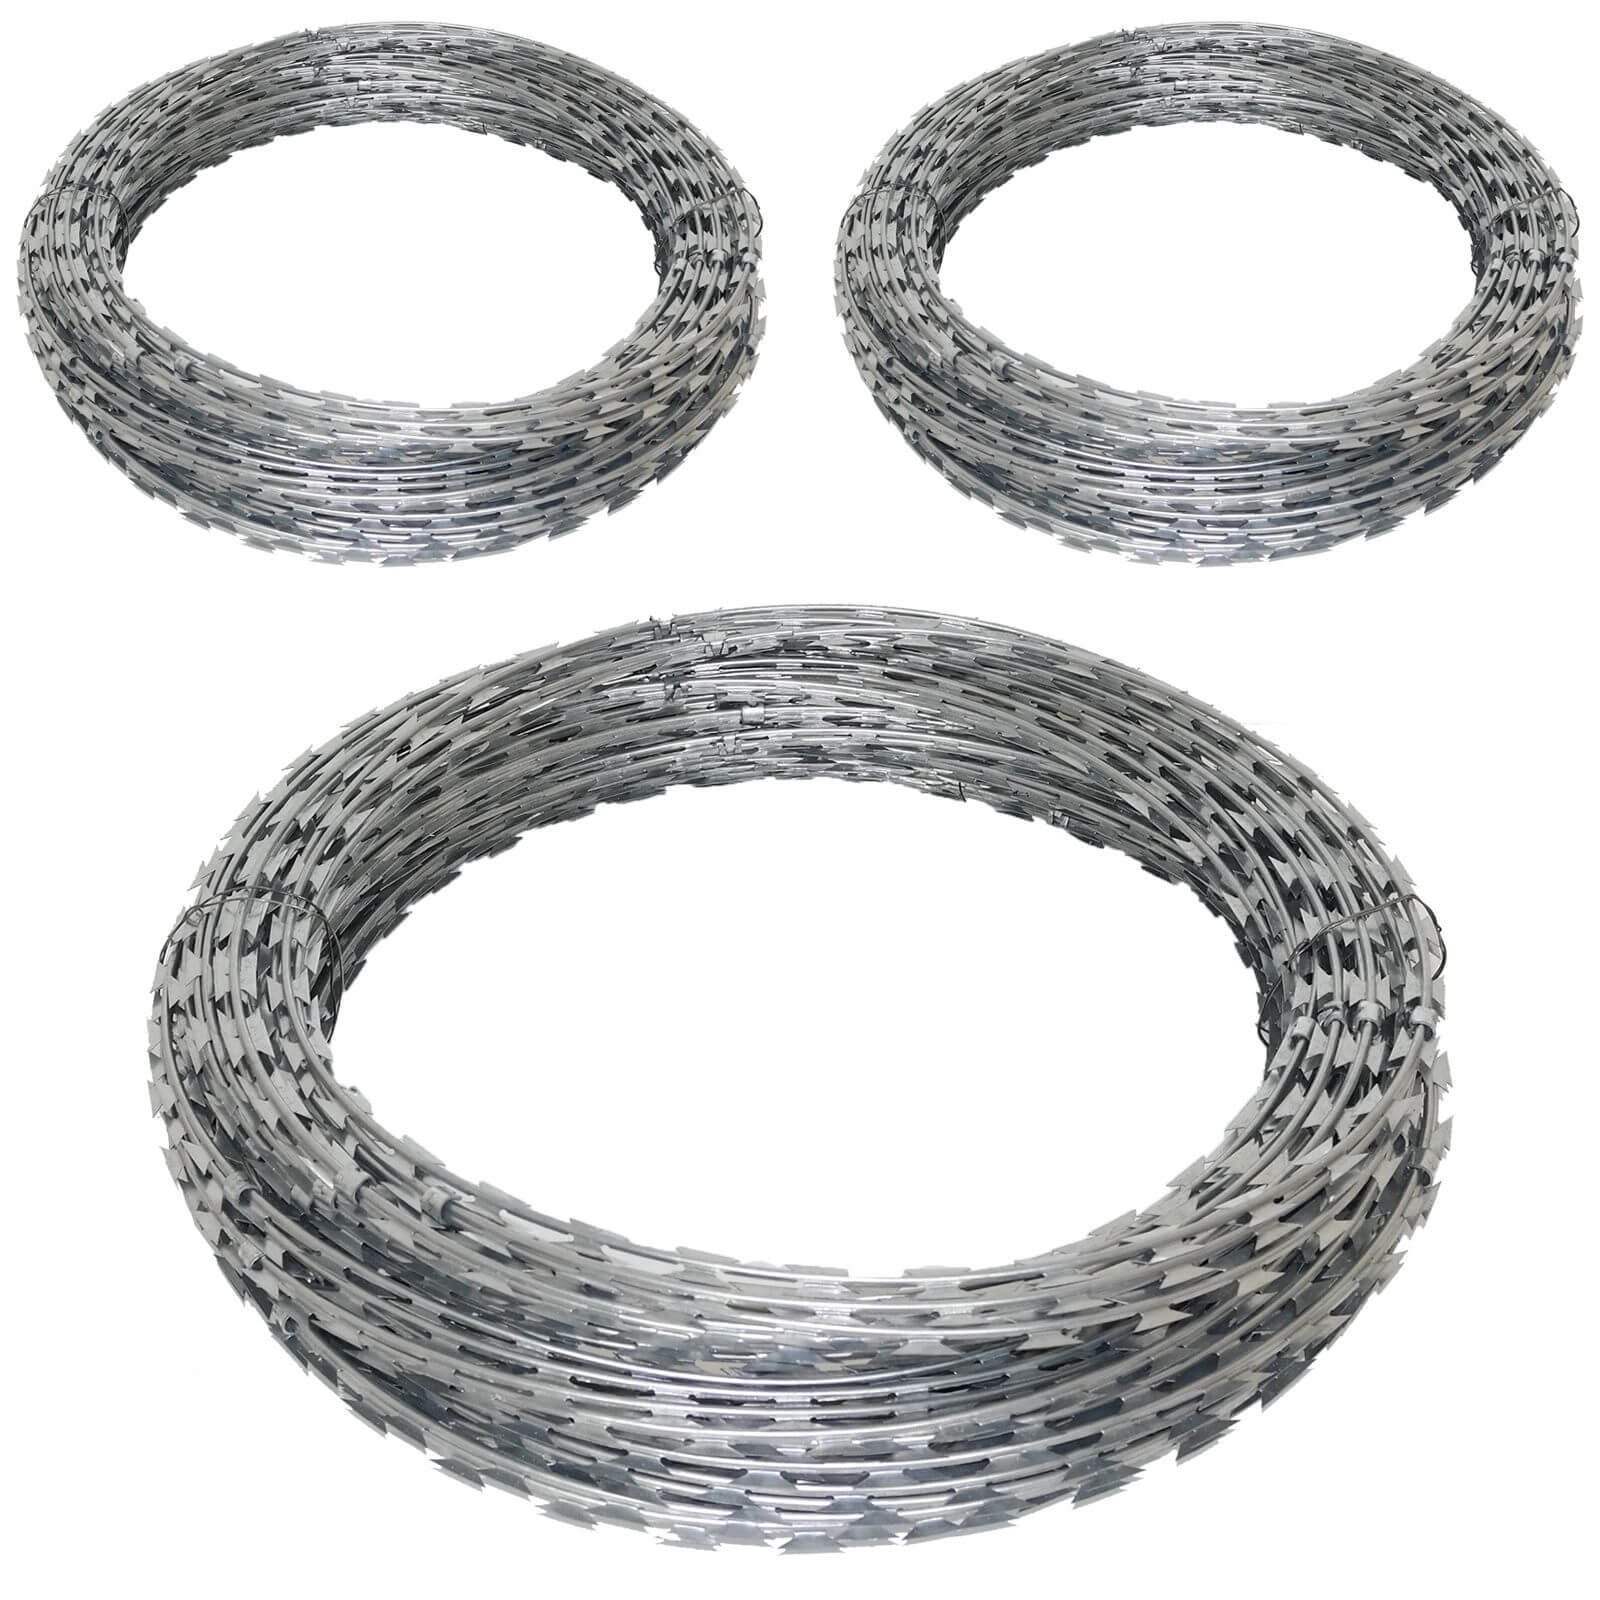 Providing Top-Notch Razor Wire Fencing Solutions